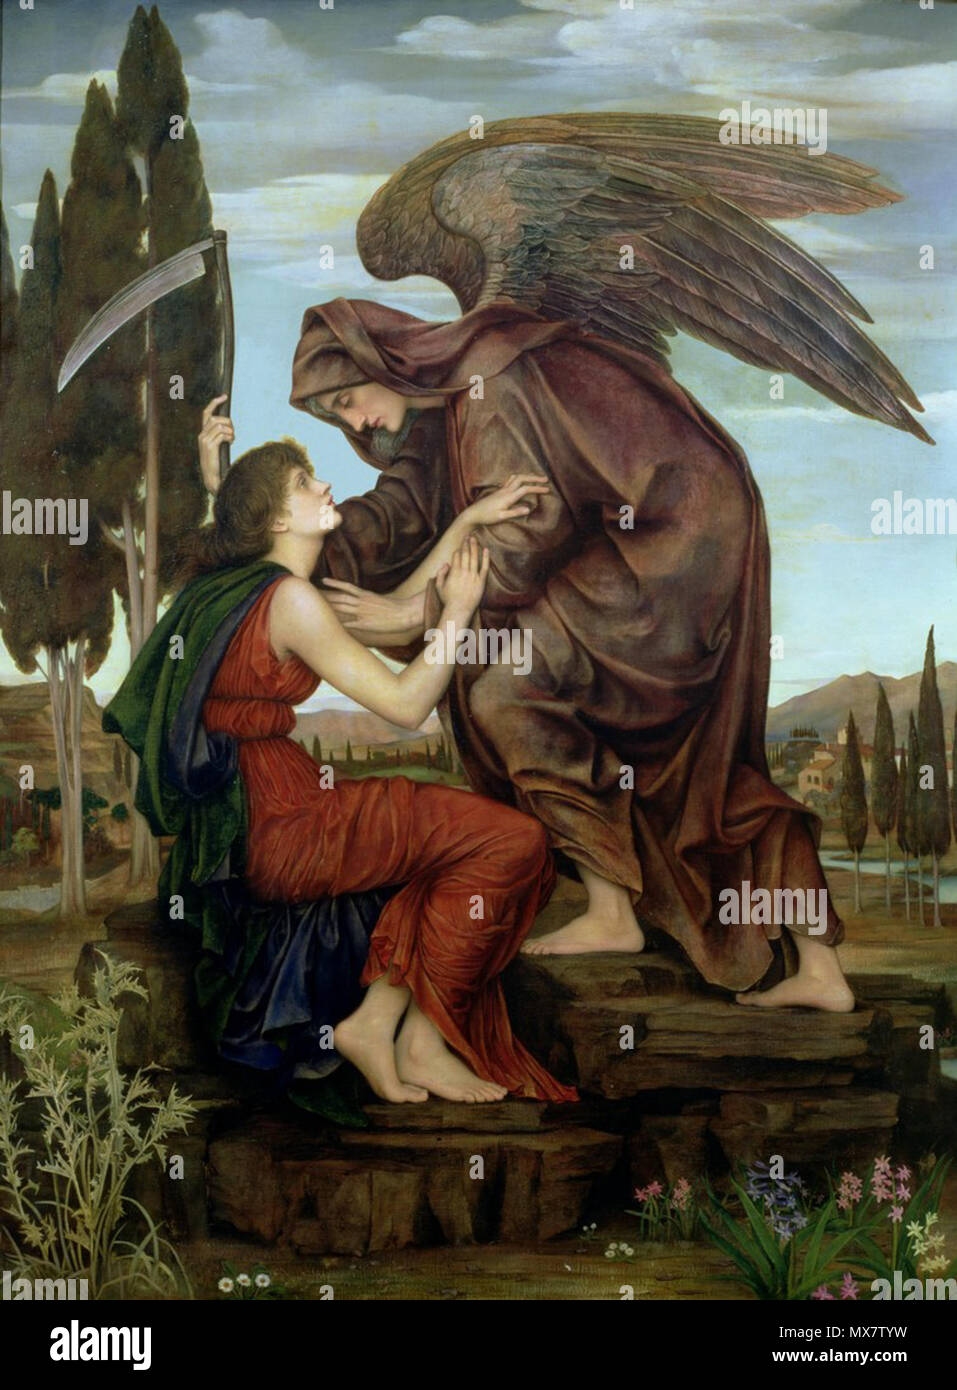 .  English: An artistic depiction of the angel of death. Painted in 1881 by Evelyn De Morgan, née Pickering (1855-1919). Source: http://wendydenise13.tripod.com/fineart1/morgan-angelofdeath.jpg (found inactive 2006-10-27) Alternate source: http://www.elp.it/bygothic/immagini/arte/demorgan/15.jpeg (accessed 2006-10-27) . 1881 200 Evelyn De Morgan - Angel of Death Stock Photo